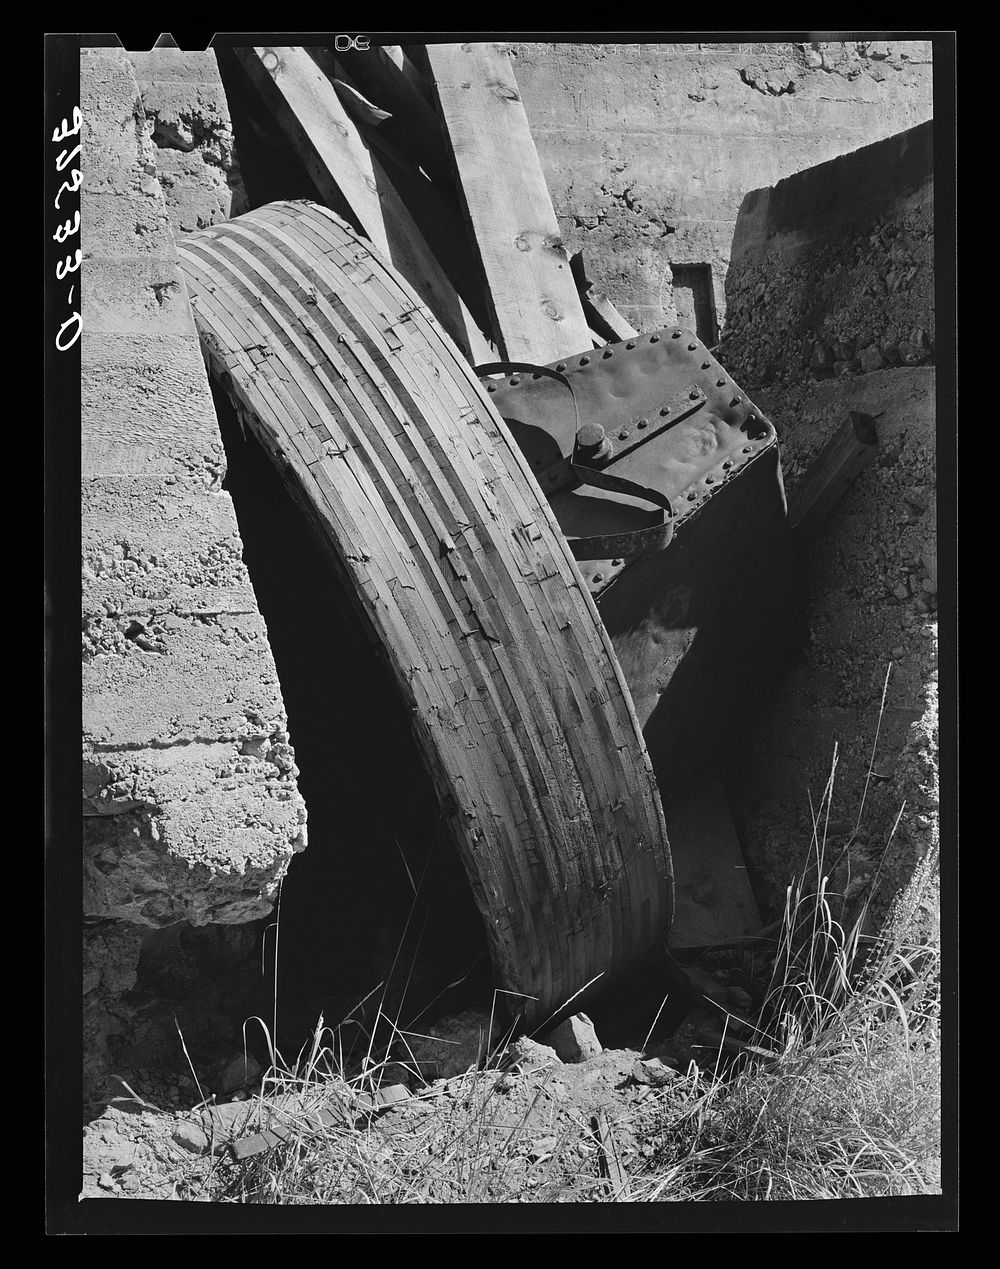 [Untitled photo, possibly related to: Abandoned equipment at gold mill showing laminated wooden wheels. Telluride, Colorado]…